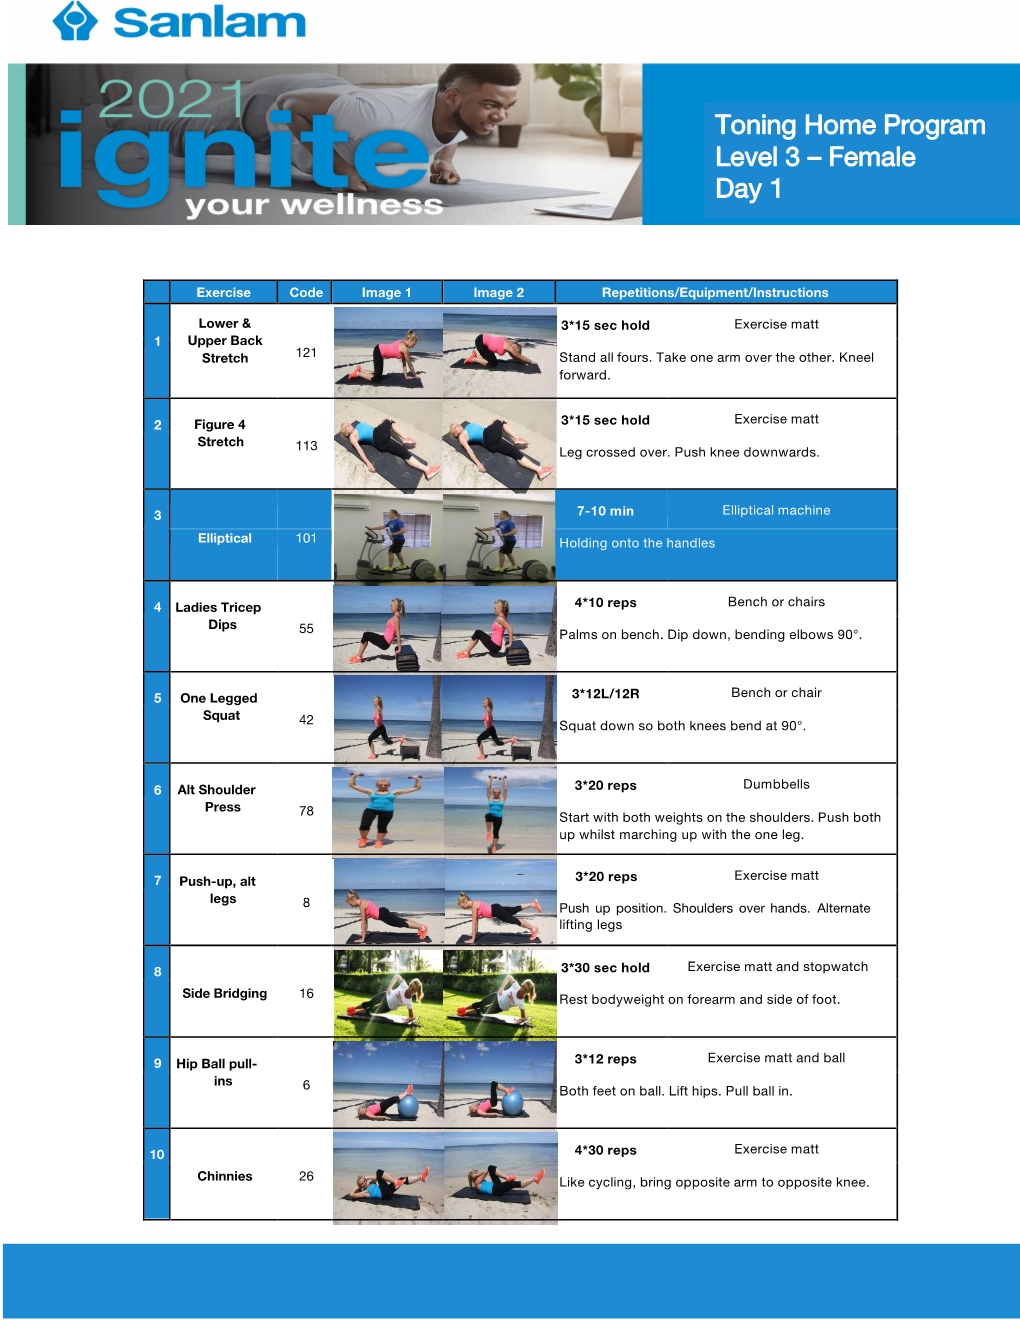 Exercise Code Image 1 Image 2 Repetitions/Equipment/Instructions 1